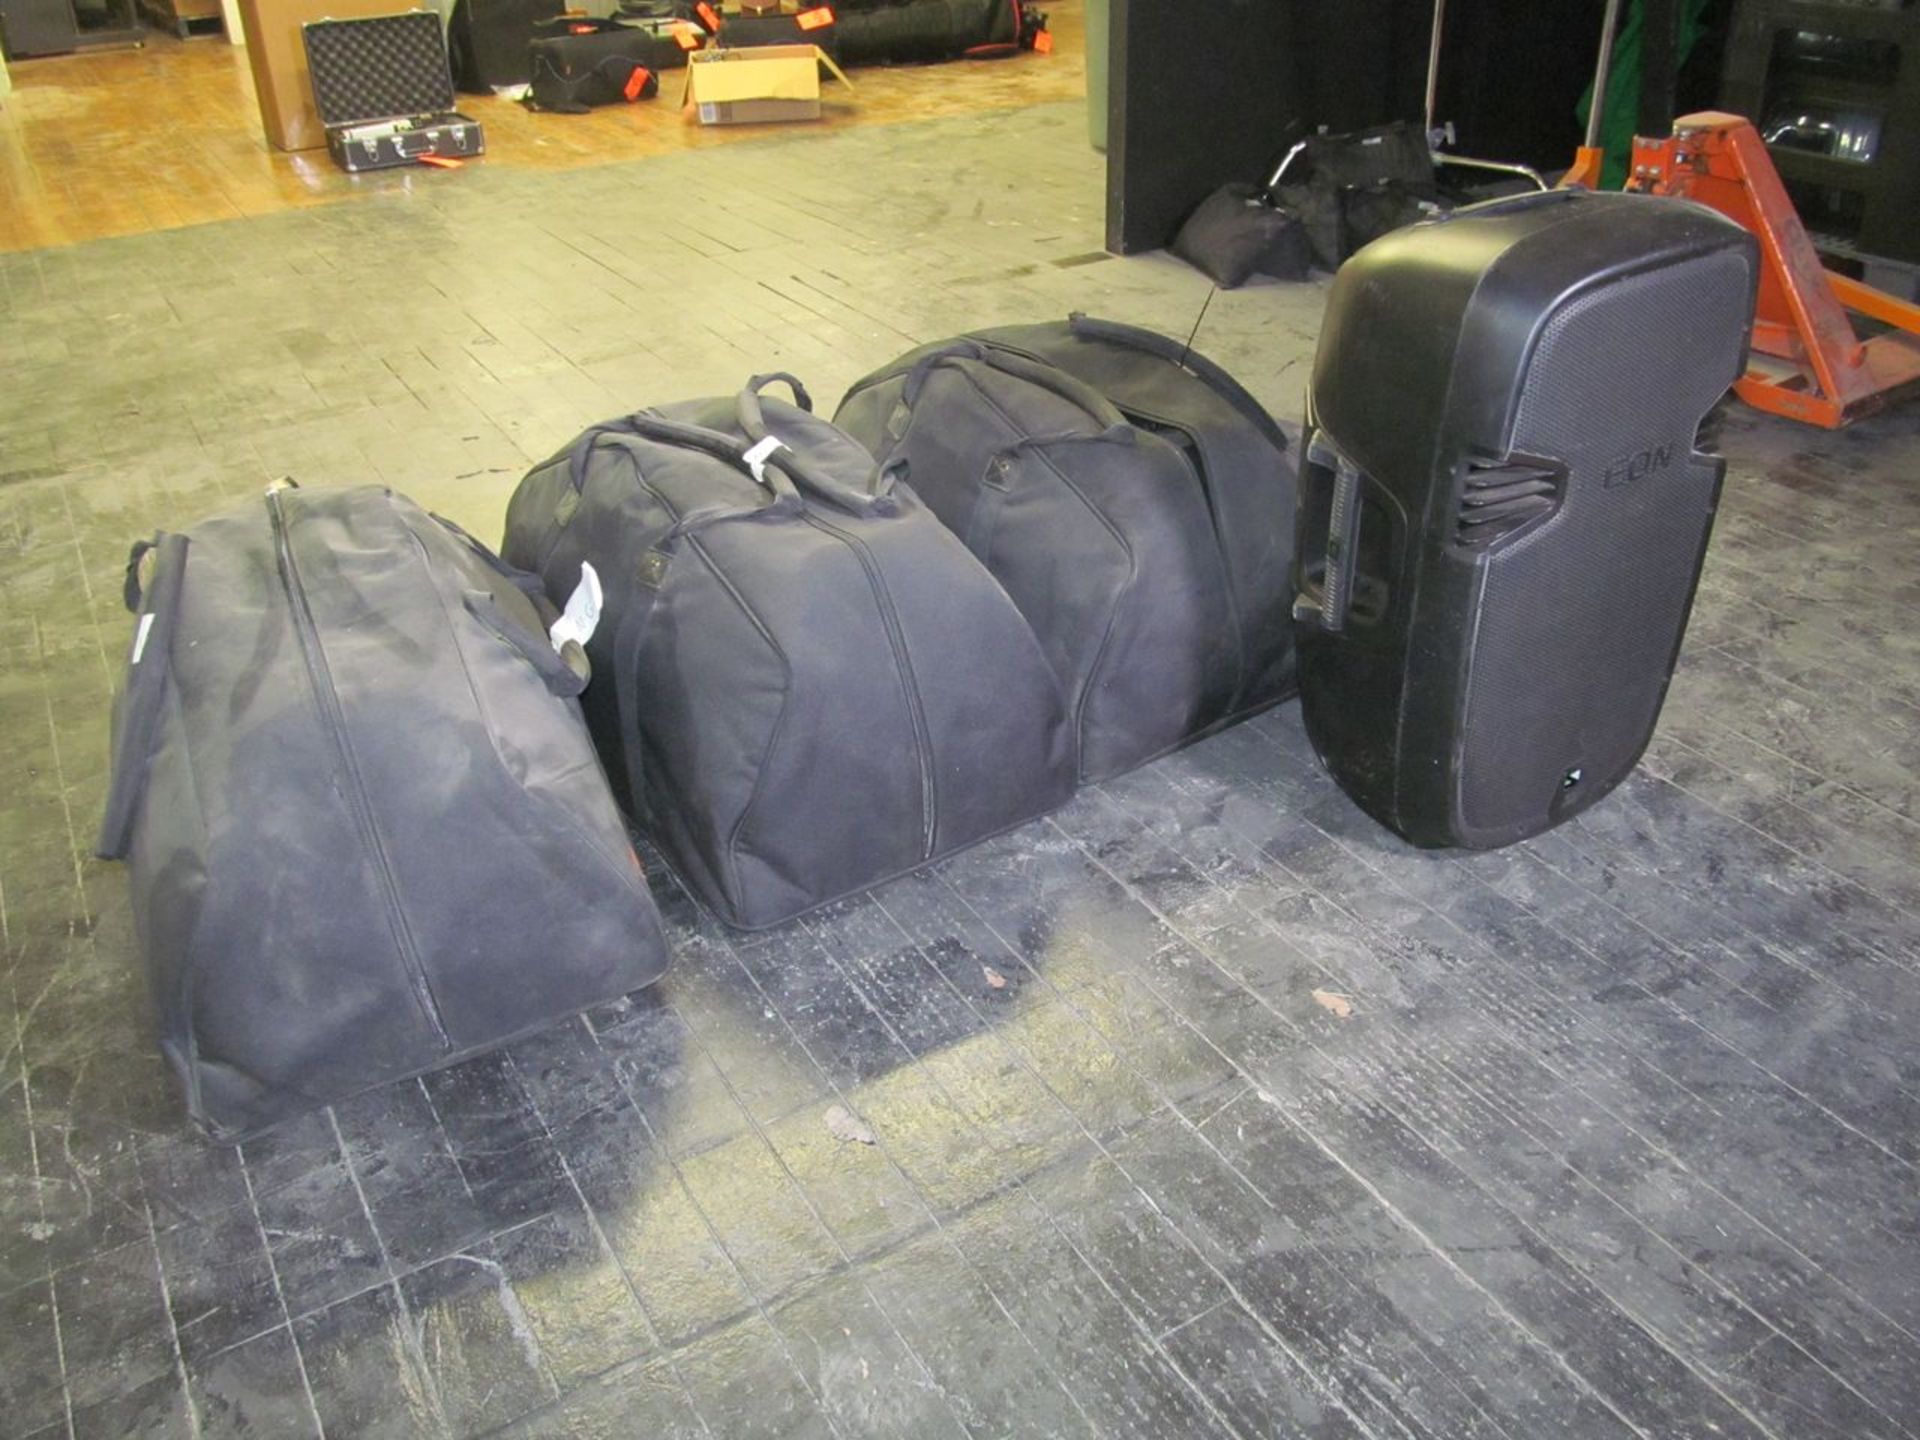 Lot - (4) JBL Eon 515X2 Speakers; with Carrying Bags